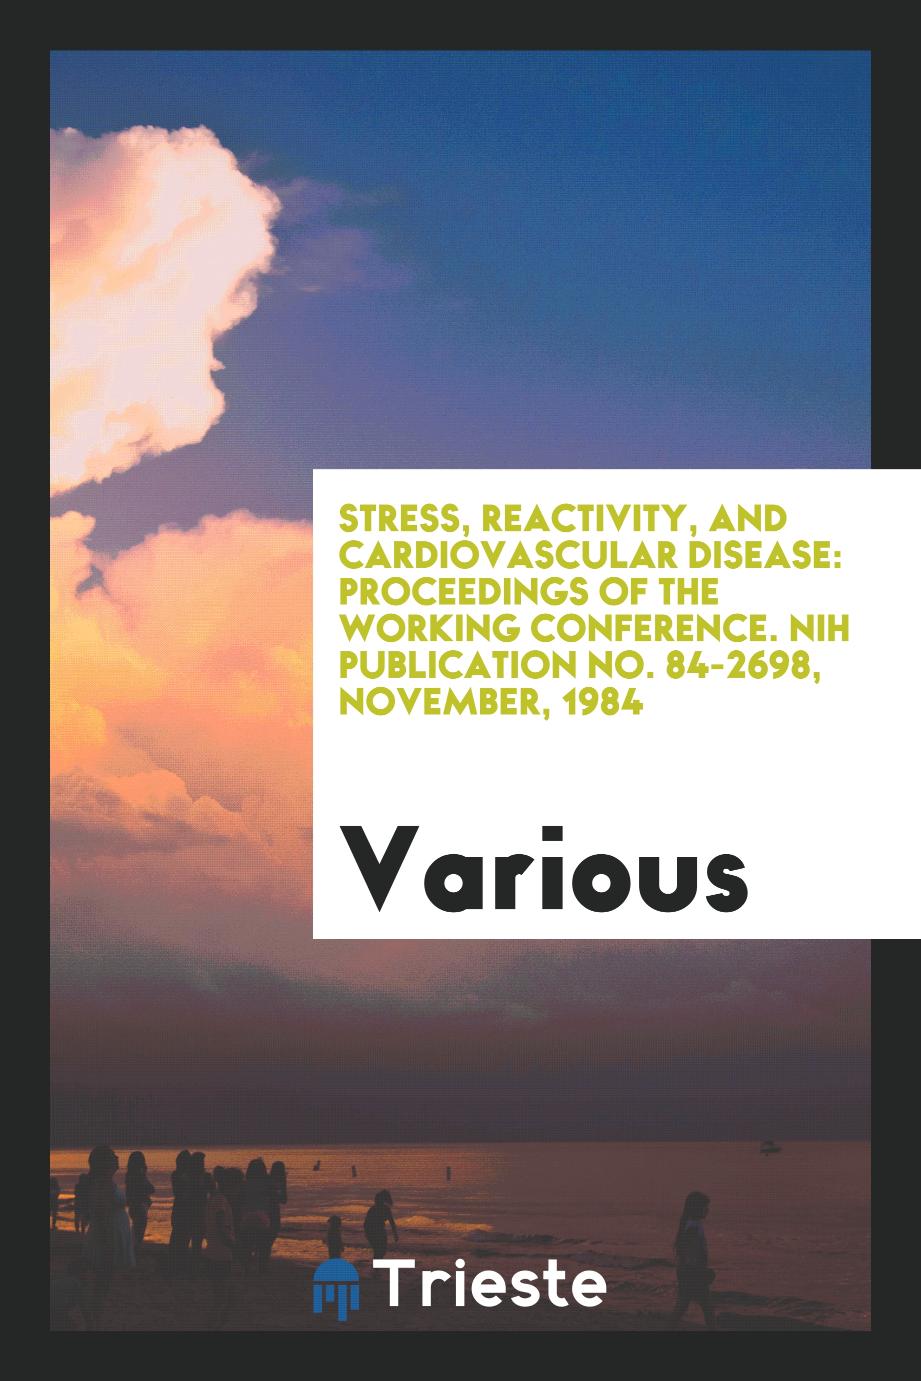 Stress, reactivity, and cardiovascular disease: proceedings of the working conference. NIH Publication No. 84-2698, November, 1984